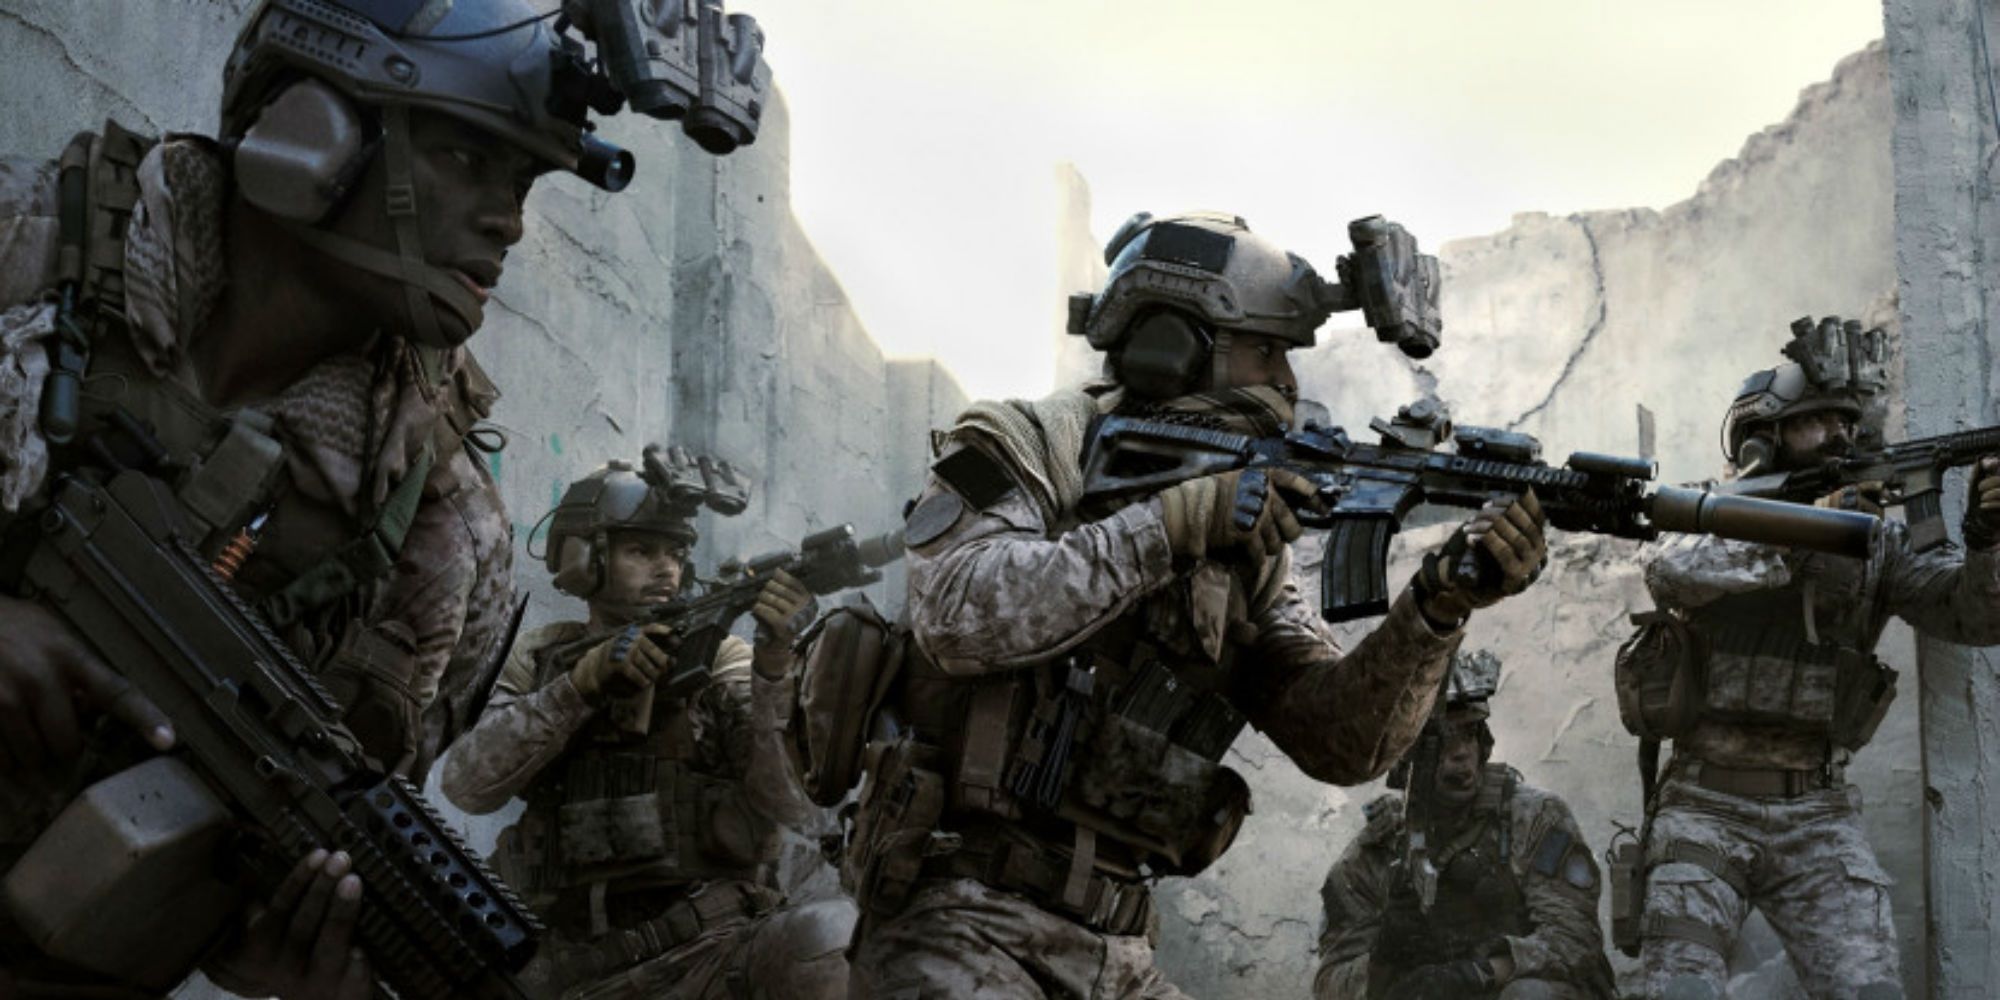 Screenshot from the Call of Duty series, showing soldeirs in uniform.